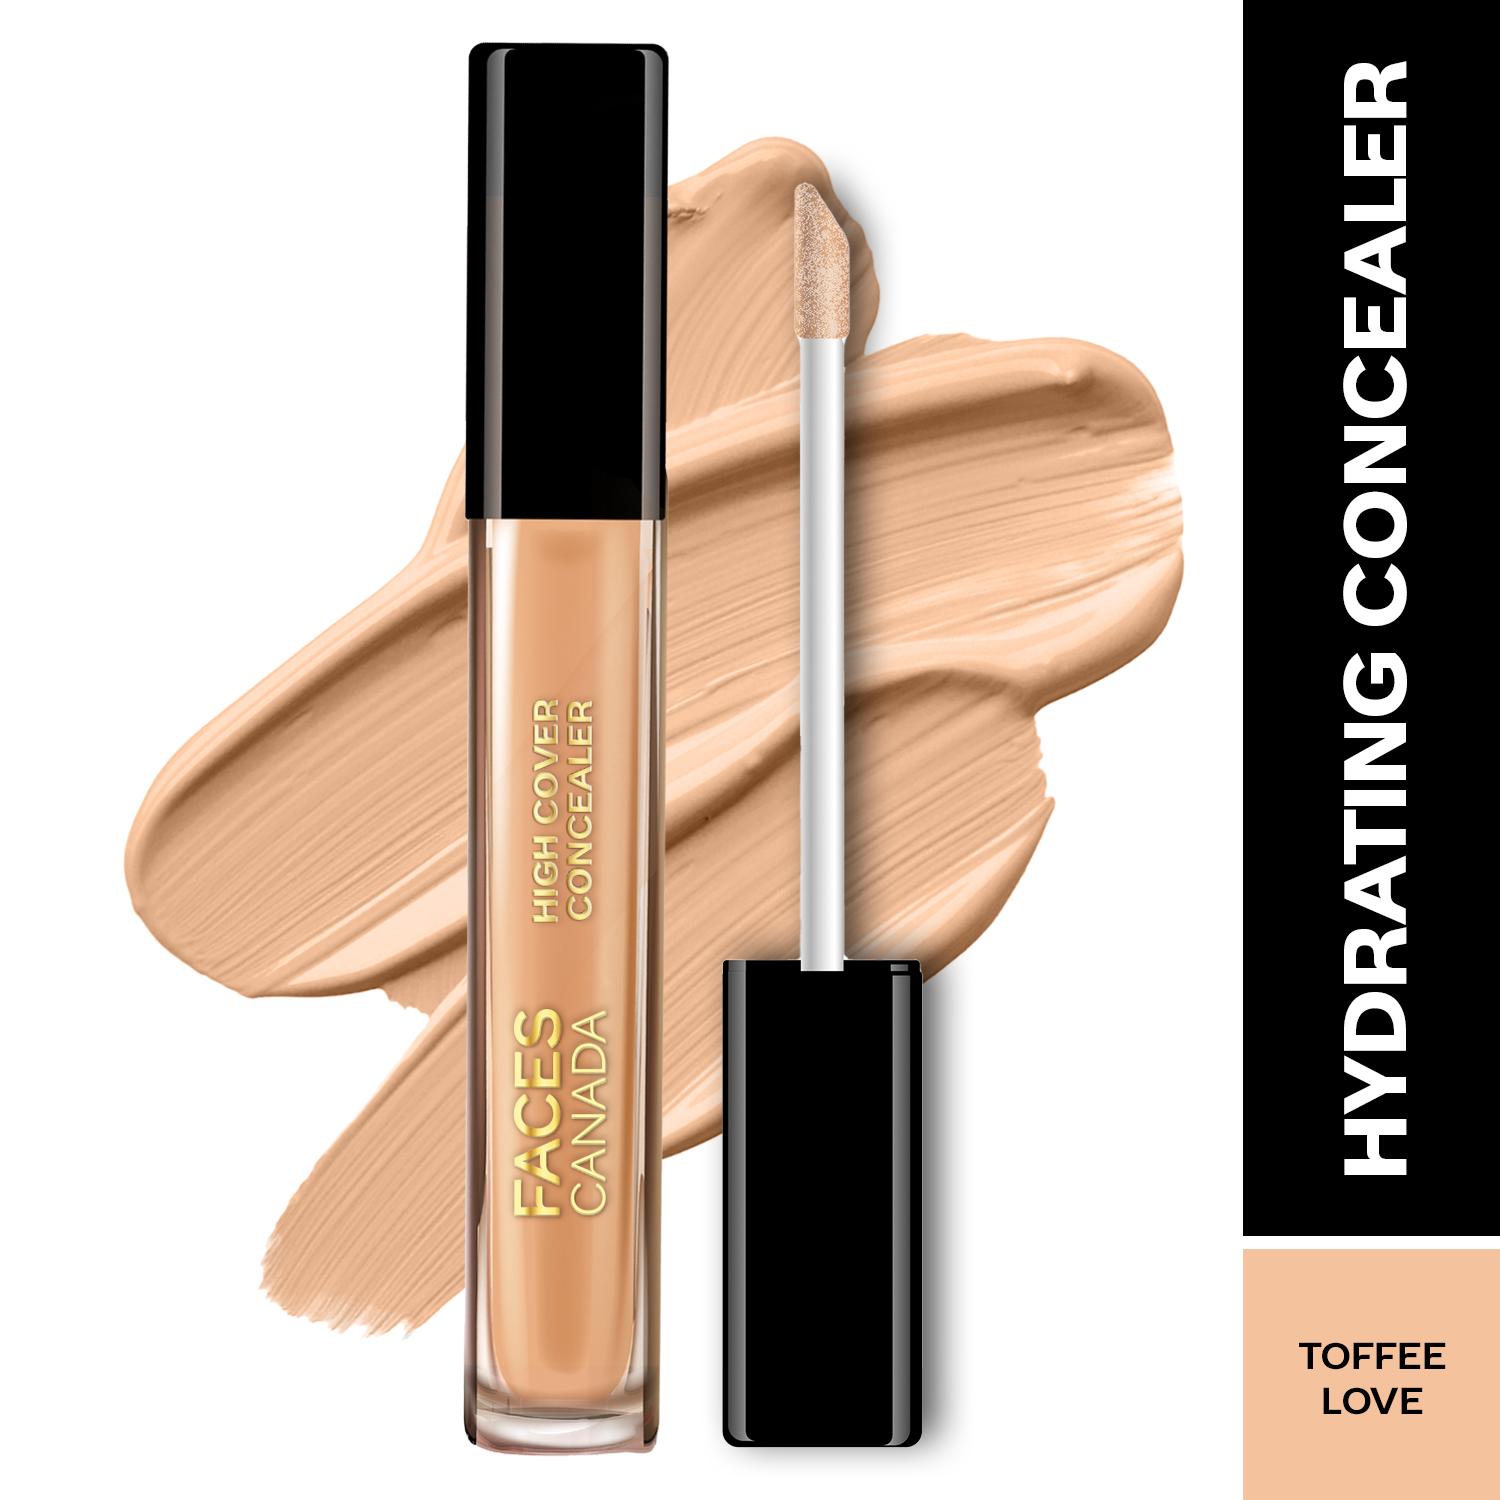 Faces Canada | Faces Canada High Cover Concealer - Toffee Love 04, Blends Easily, Natural Finish (4 ml)